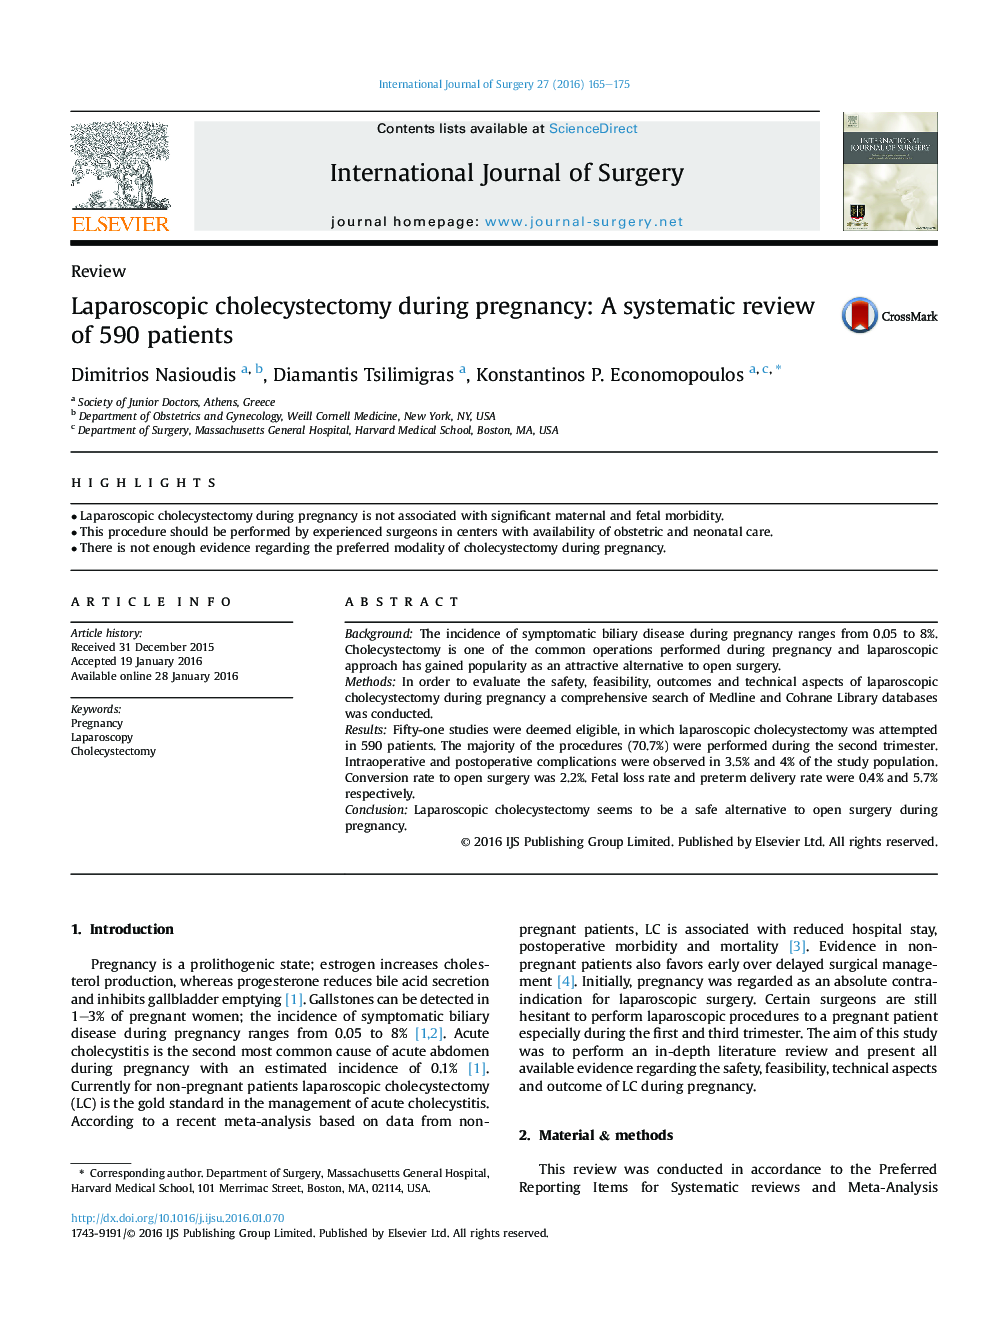 Laparoscopic cholecystectomy during pregnancy: A systematic review of 590 patients